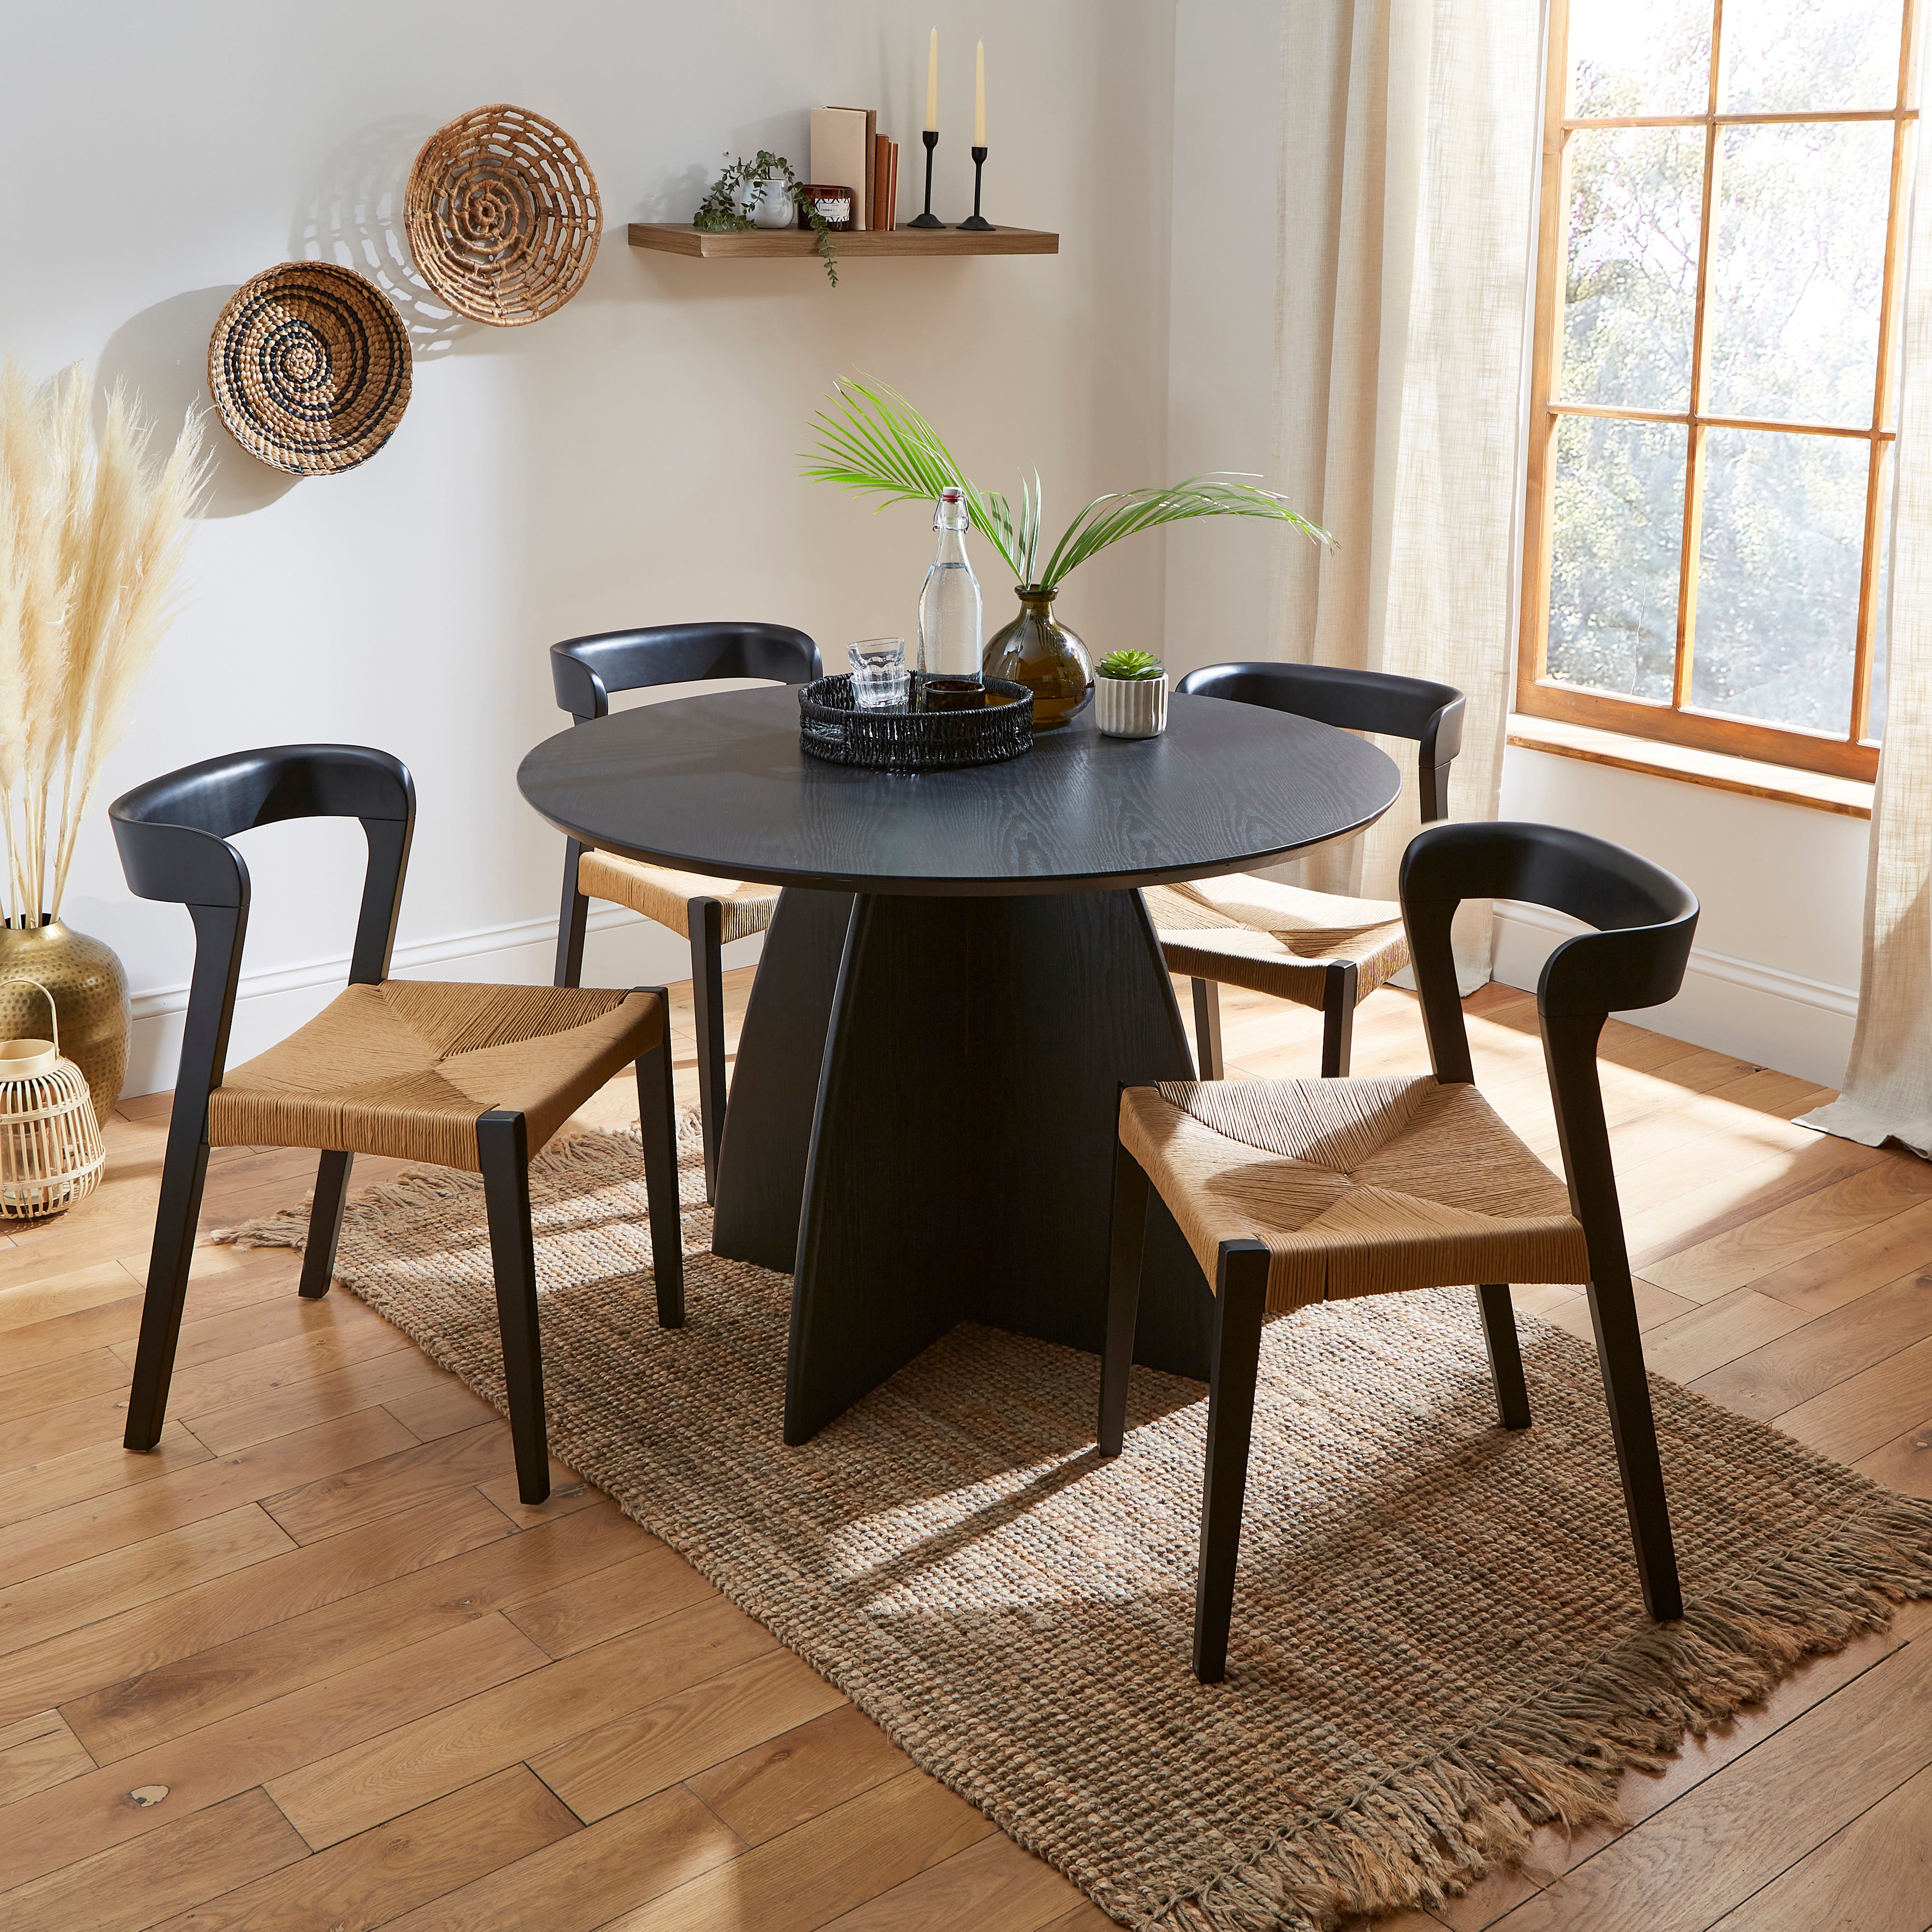 Effy 4 Seater Round Dining Table, Wood Effect